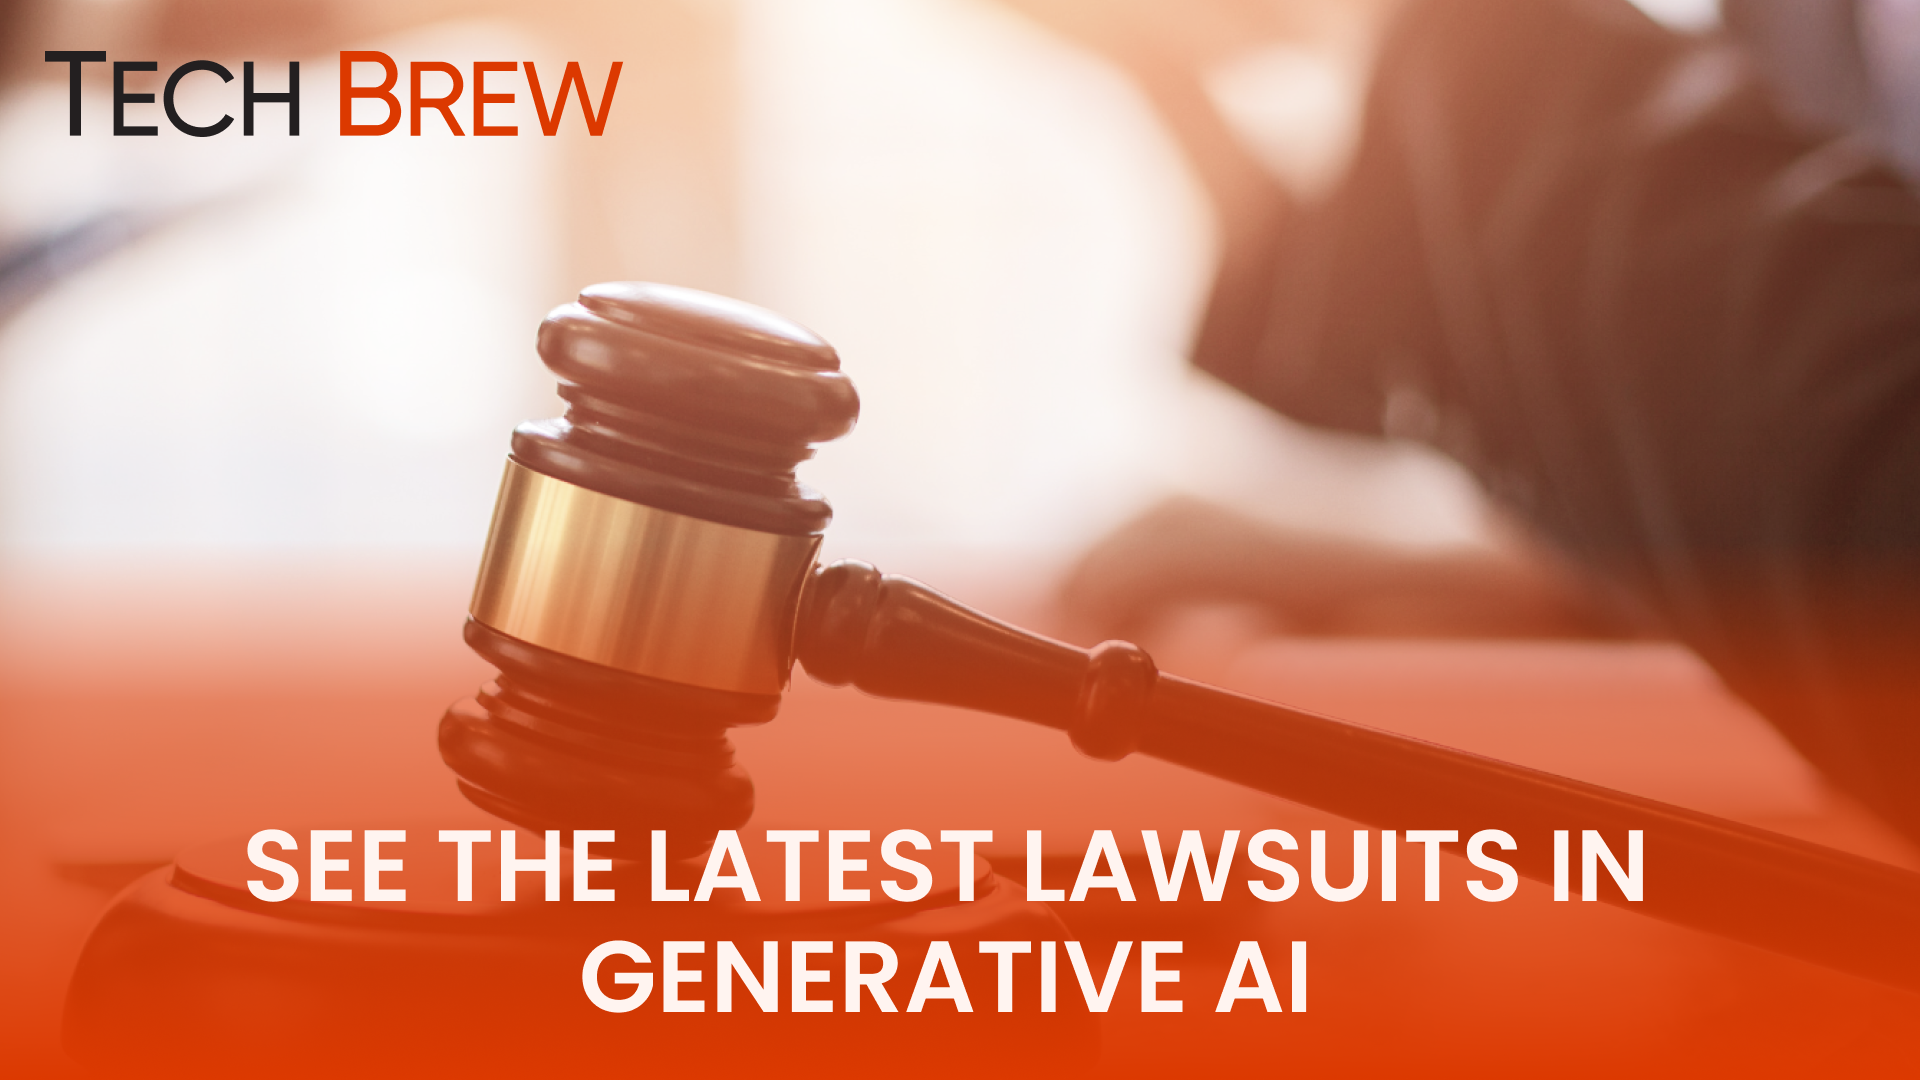 See the latest lawsuits in generative artificial intelligence